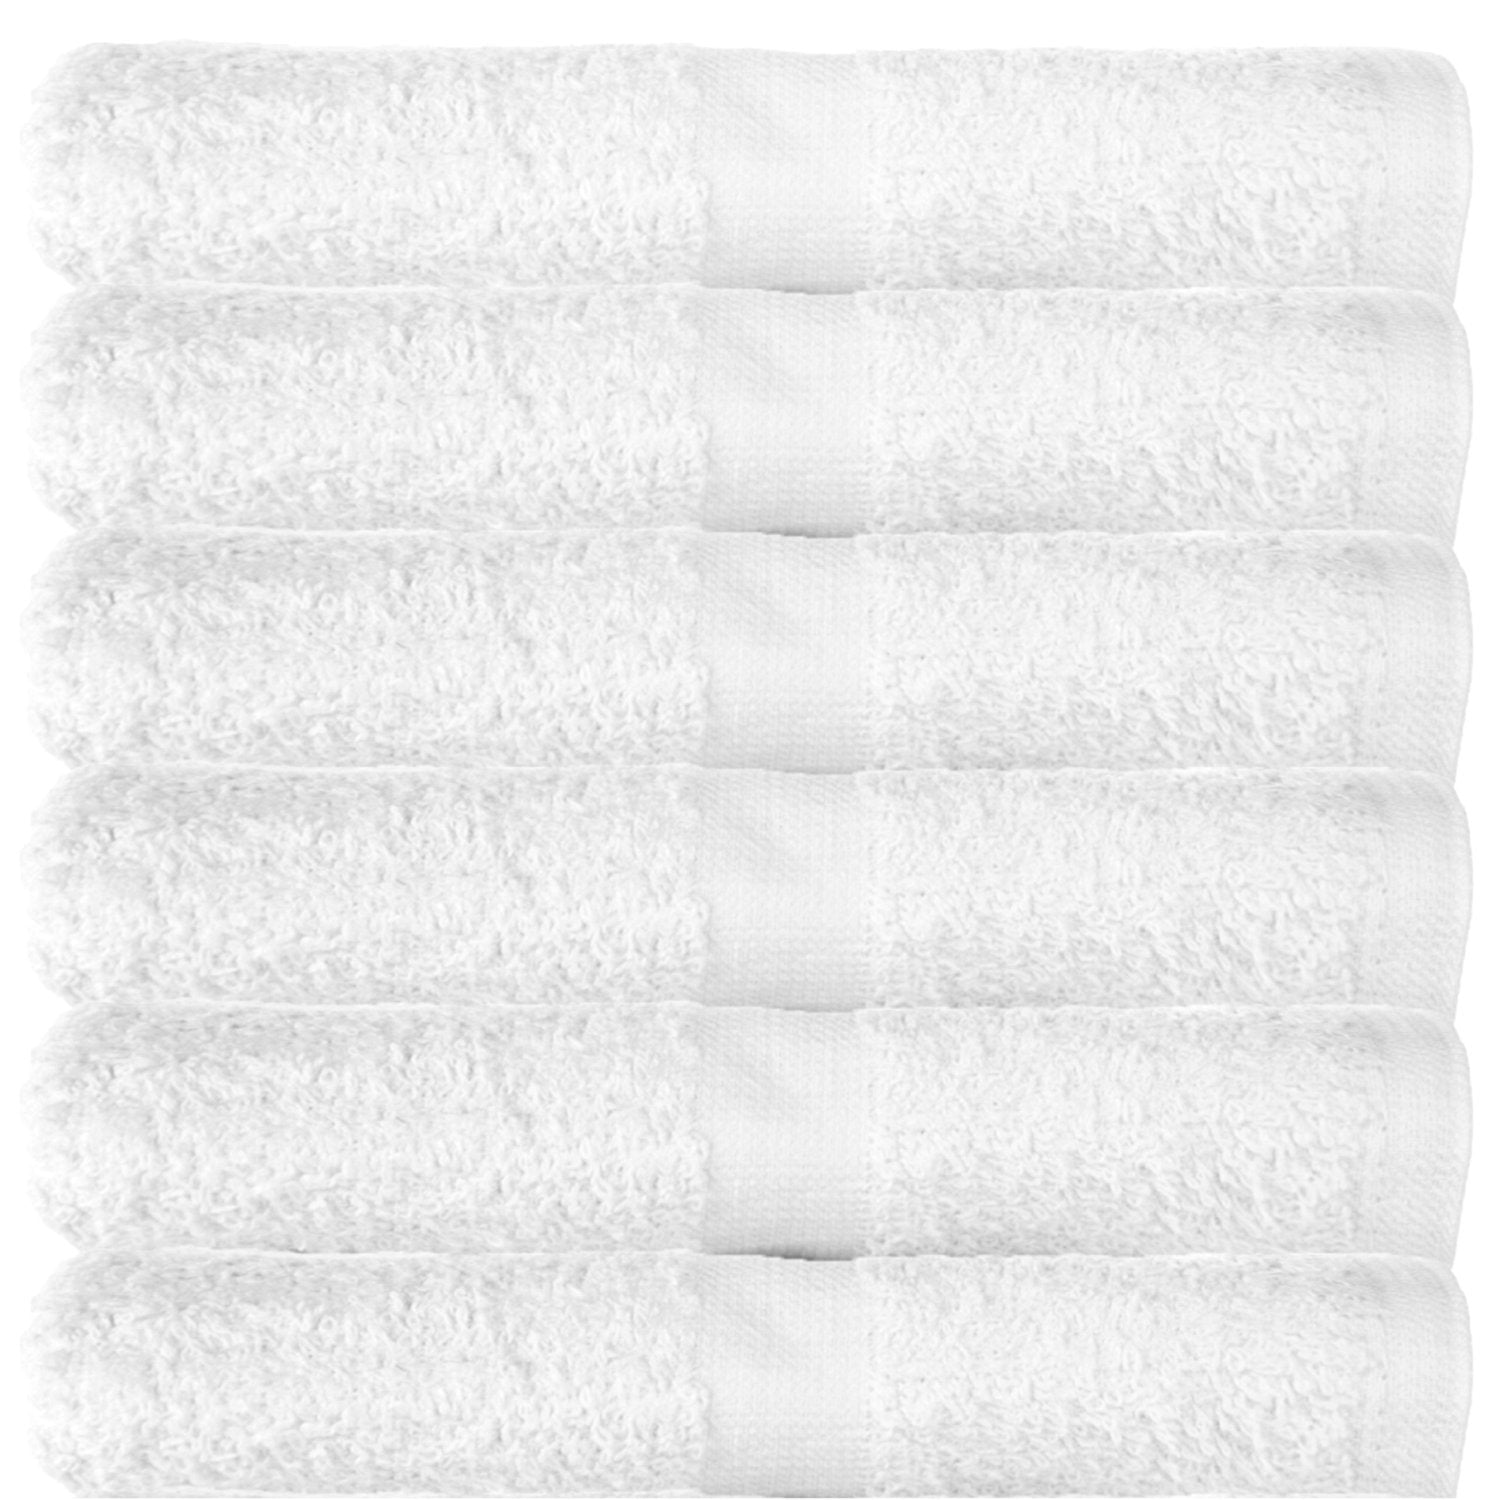 Wealuxe White Hand Towels for Bathroom 12 Pack 16x27 Inch, Cotton Hand Towel  Bulk for Gym and Spa, Soft Extra Absorbent Quick Dry Terry Bath Towels